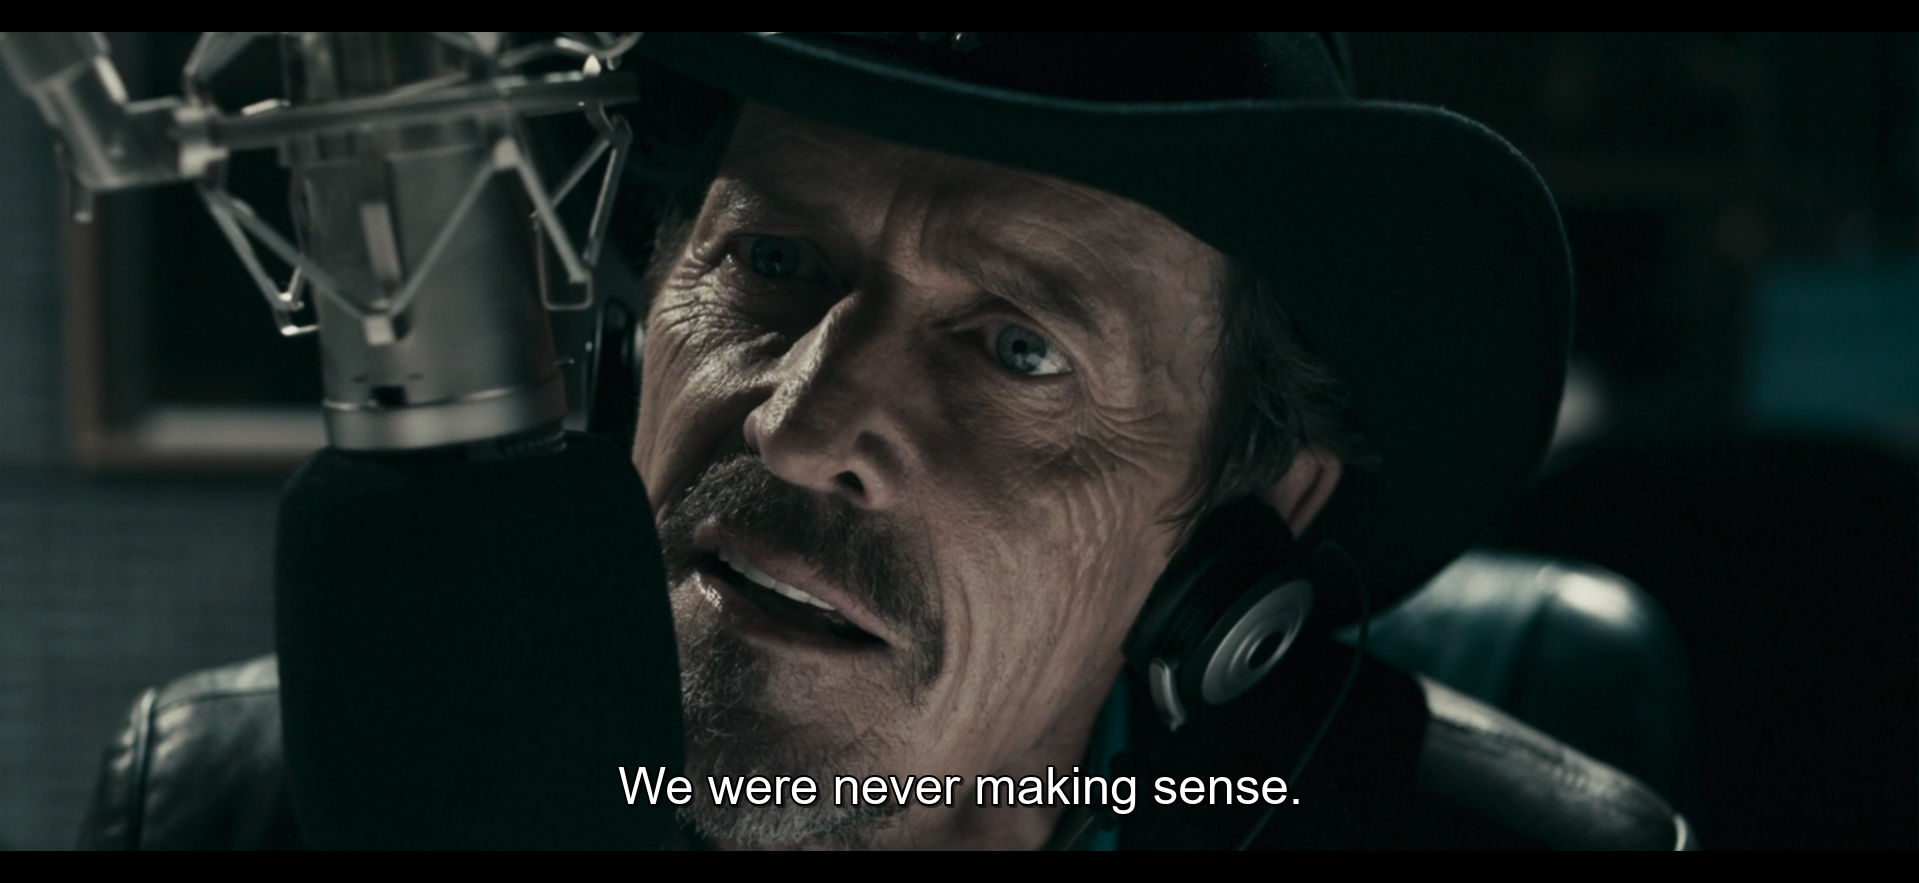 Grant Mazzy from the film Pontypool saying 'We were never making sense.'